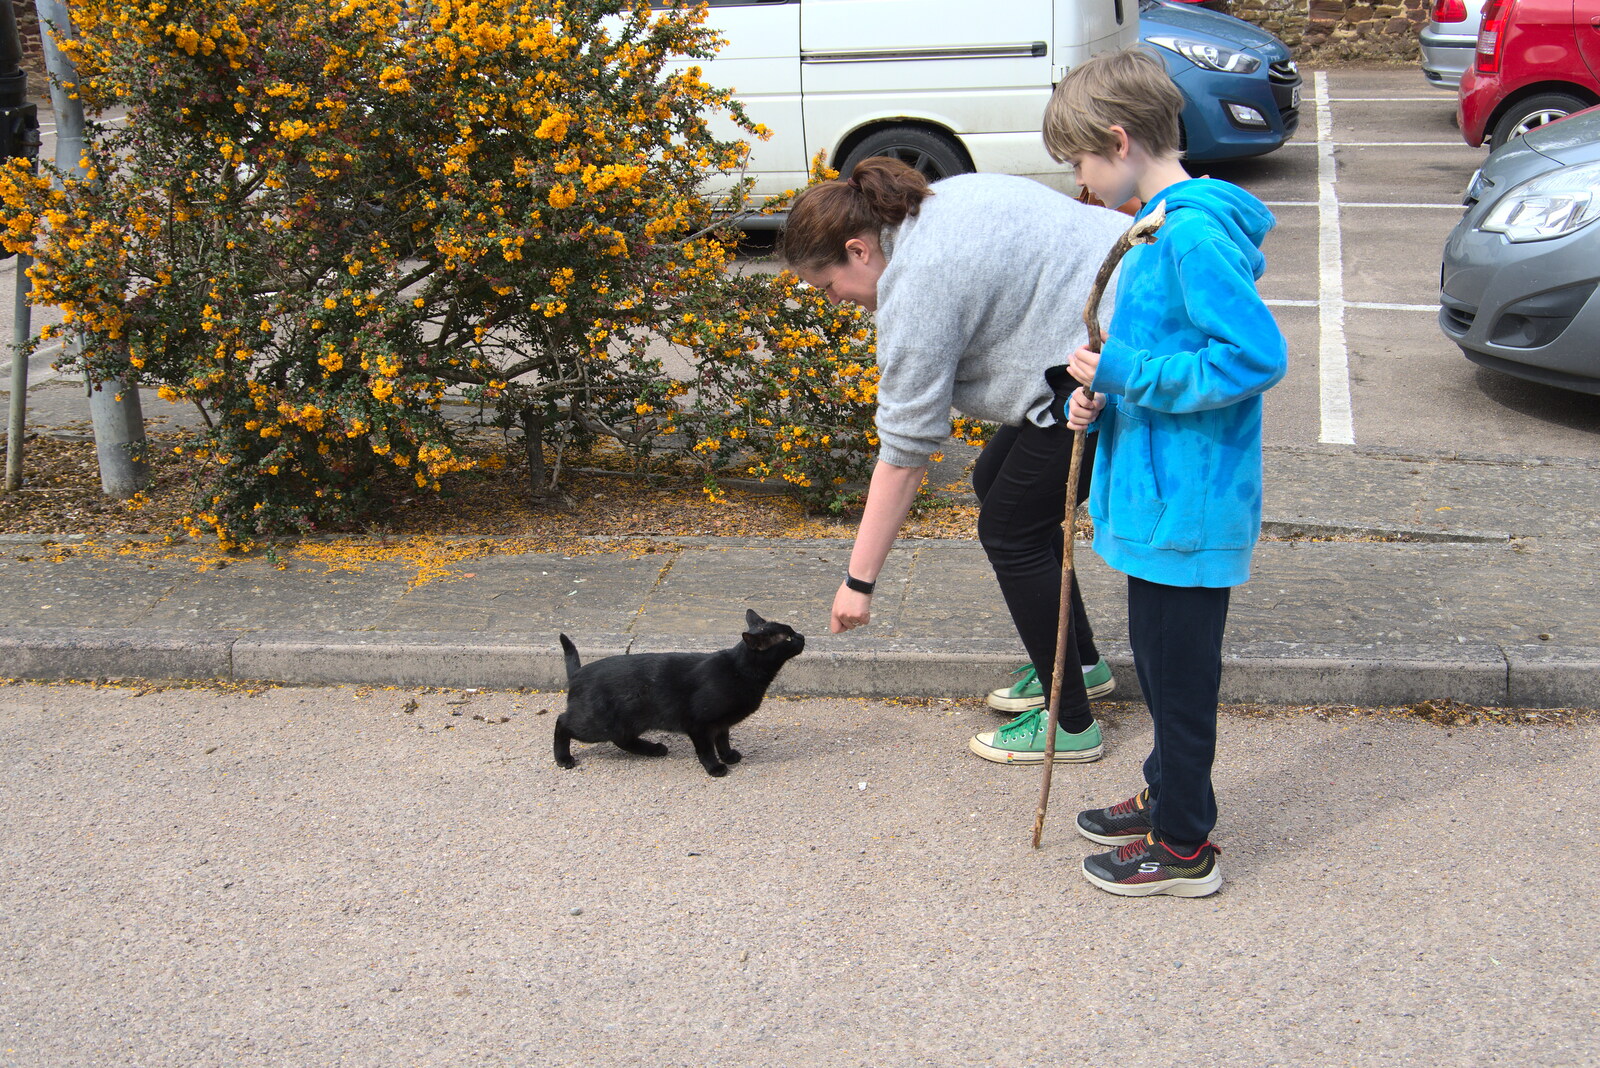 We met a friendly invisible cat in the car park from A Vaccination Afternoon, Swaffham, Norfolk - 9th May 2021